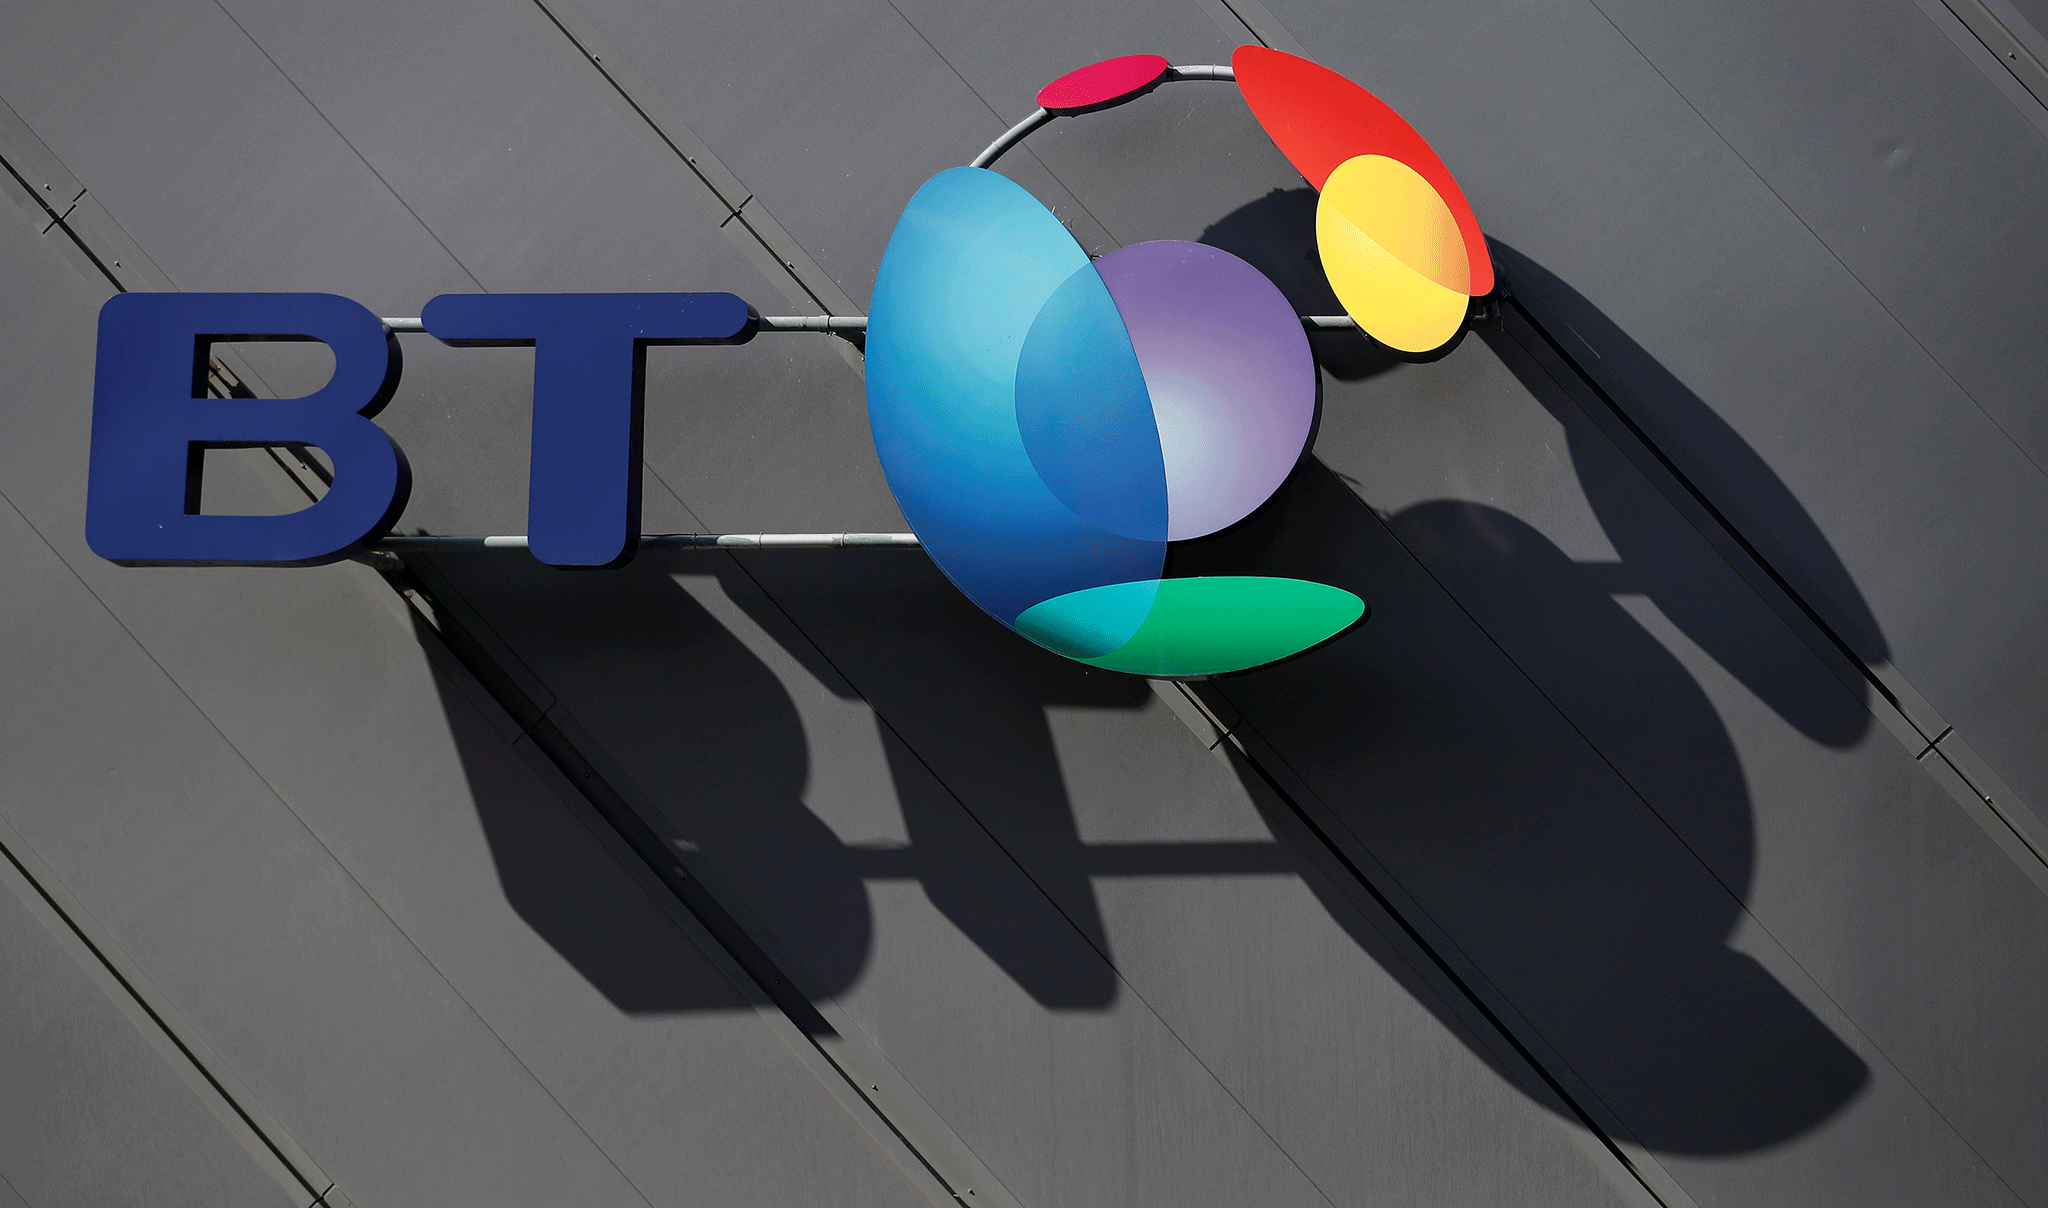 BT and Sky paid a combined £5.14bn for Premier League rights